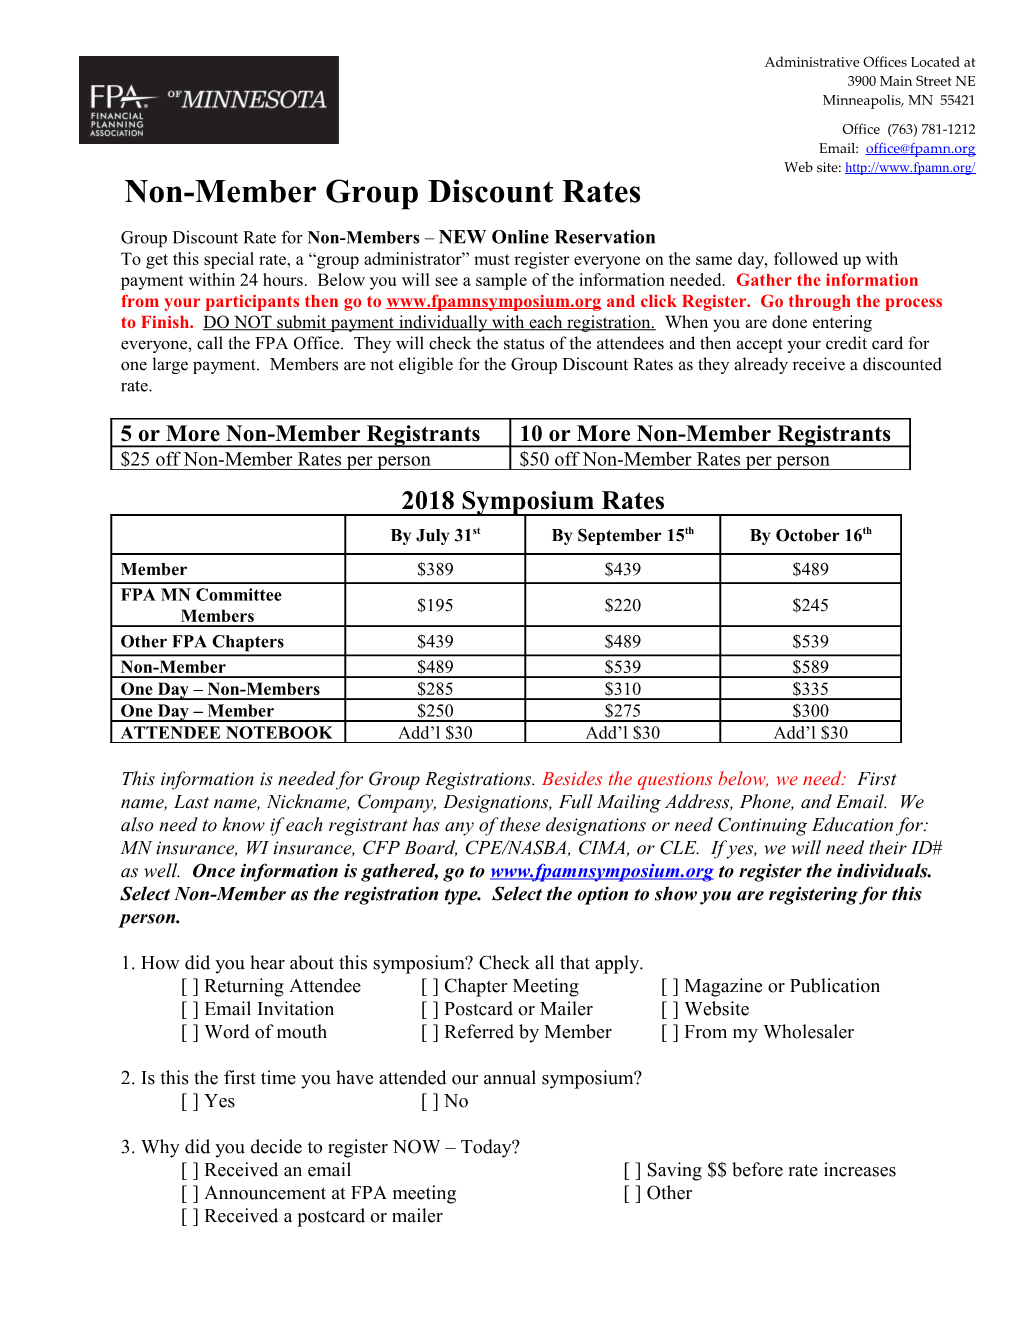 Non-Member Group Discount Rates